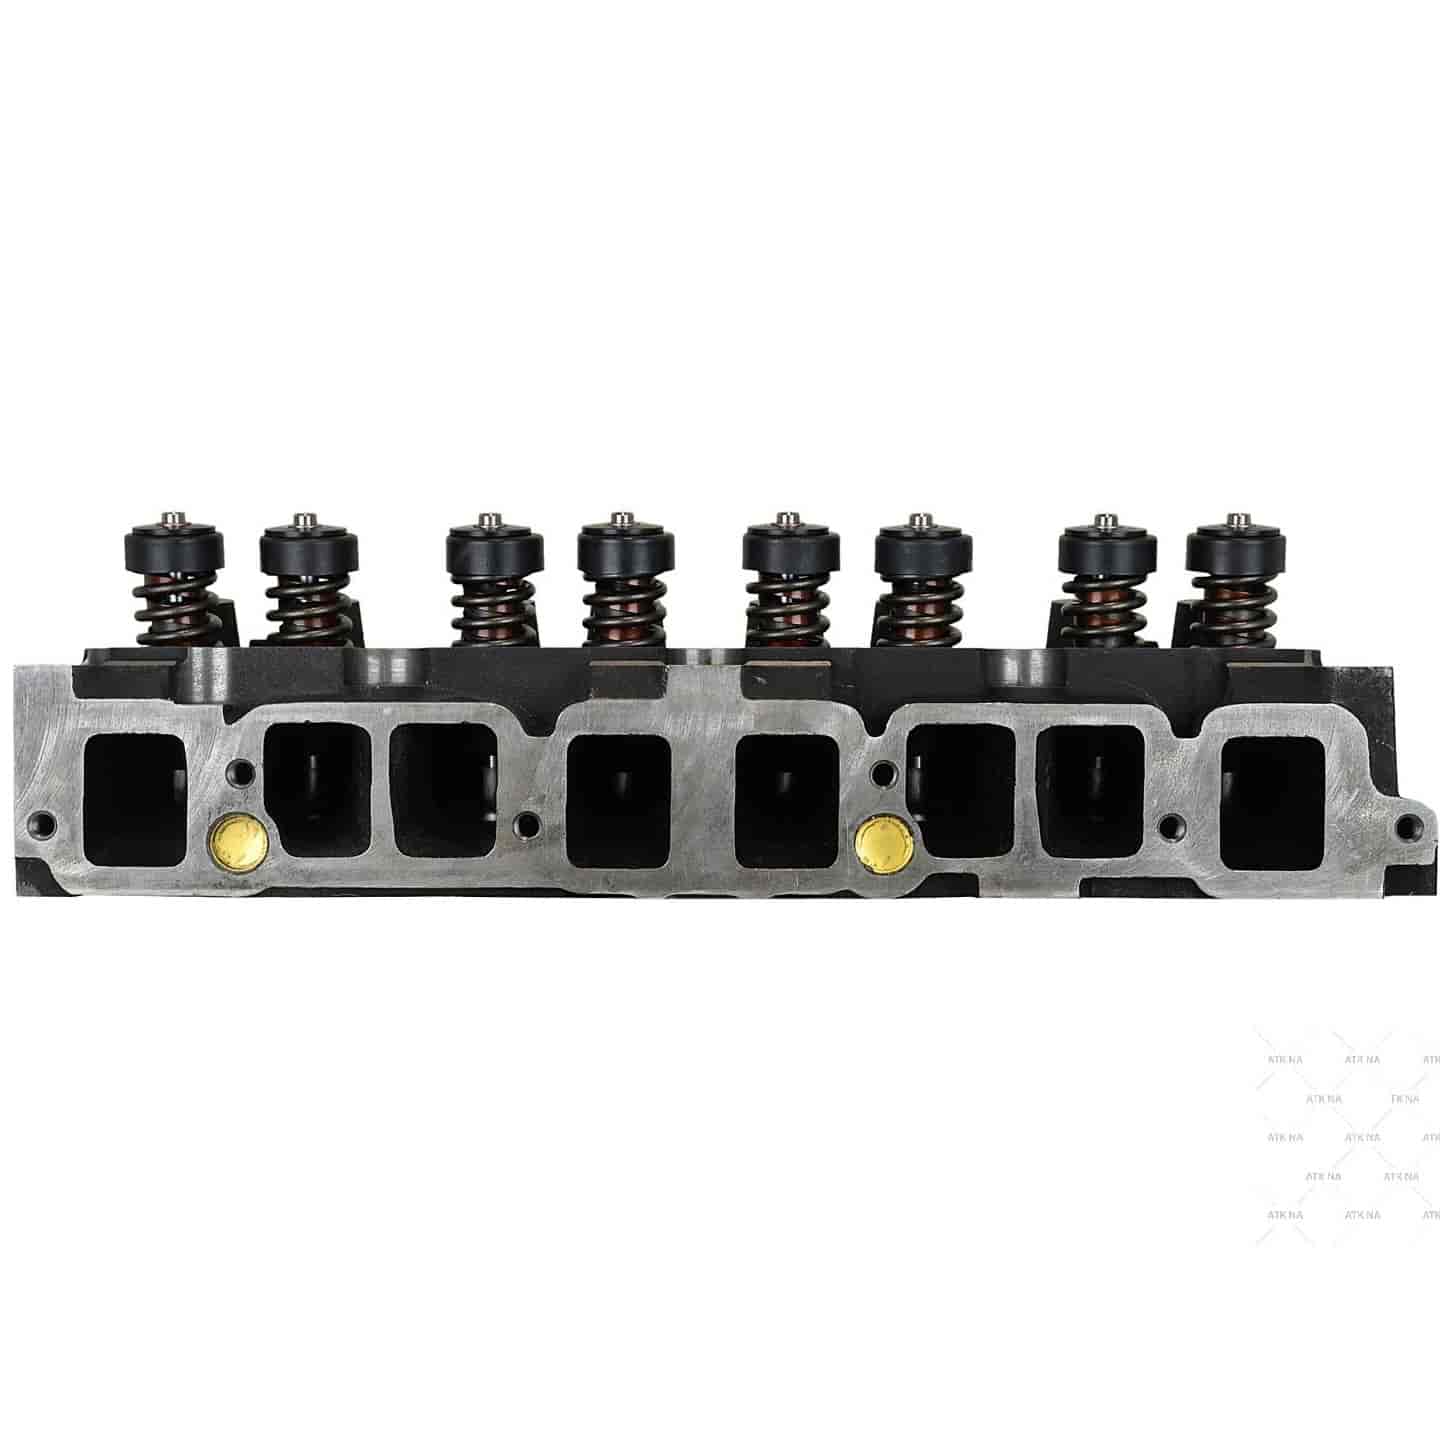 Remanufactured Cylinder Head for 1974-1990 GM Marine Applications with L4 3.0L